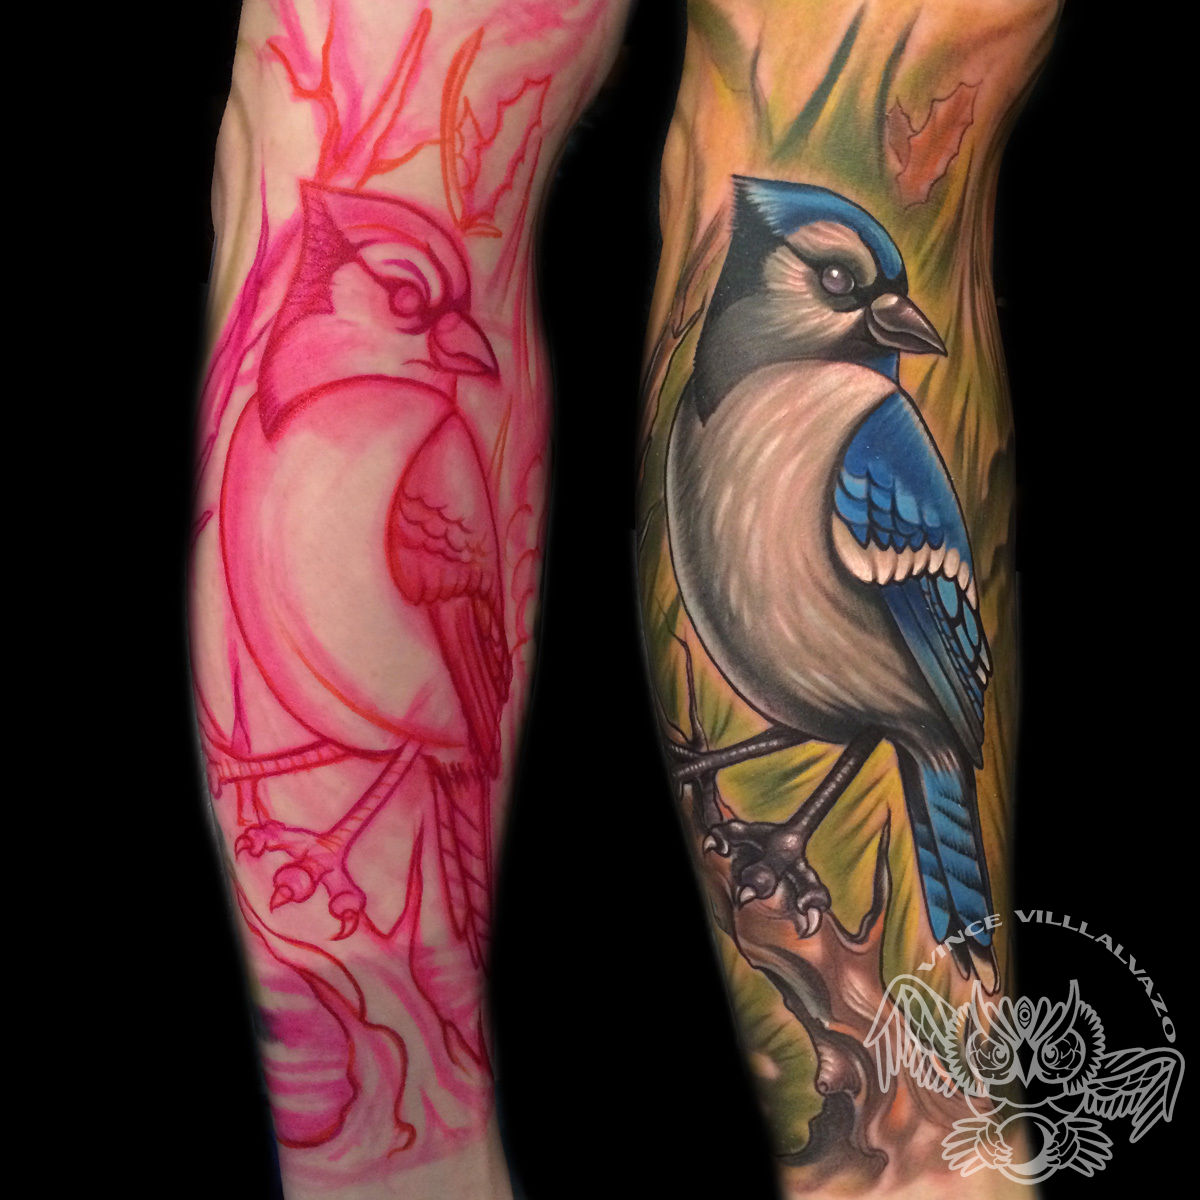 Tattoo tagged with: small, white, black, animal, violet, tiny, blue, bird, blue  jay, adrianbascur, pink, little, medium size, illustrative, upper arm |  inked-app.com